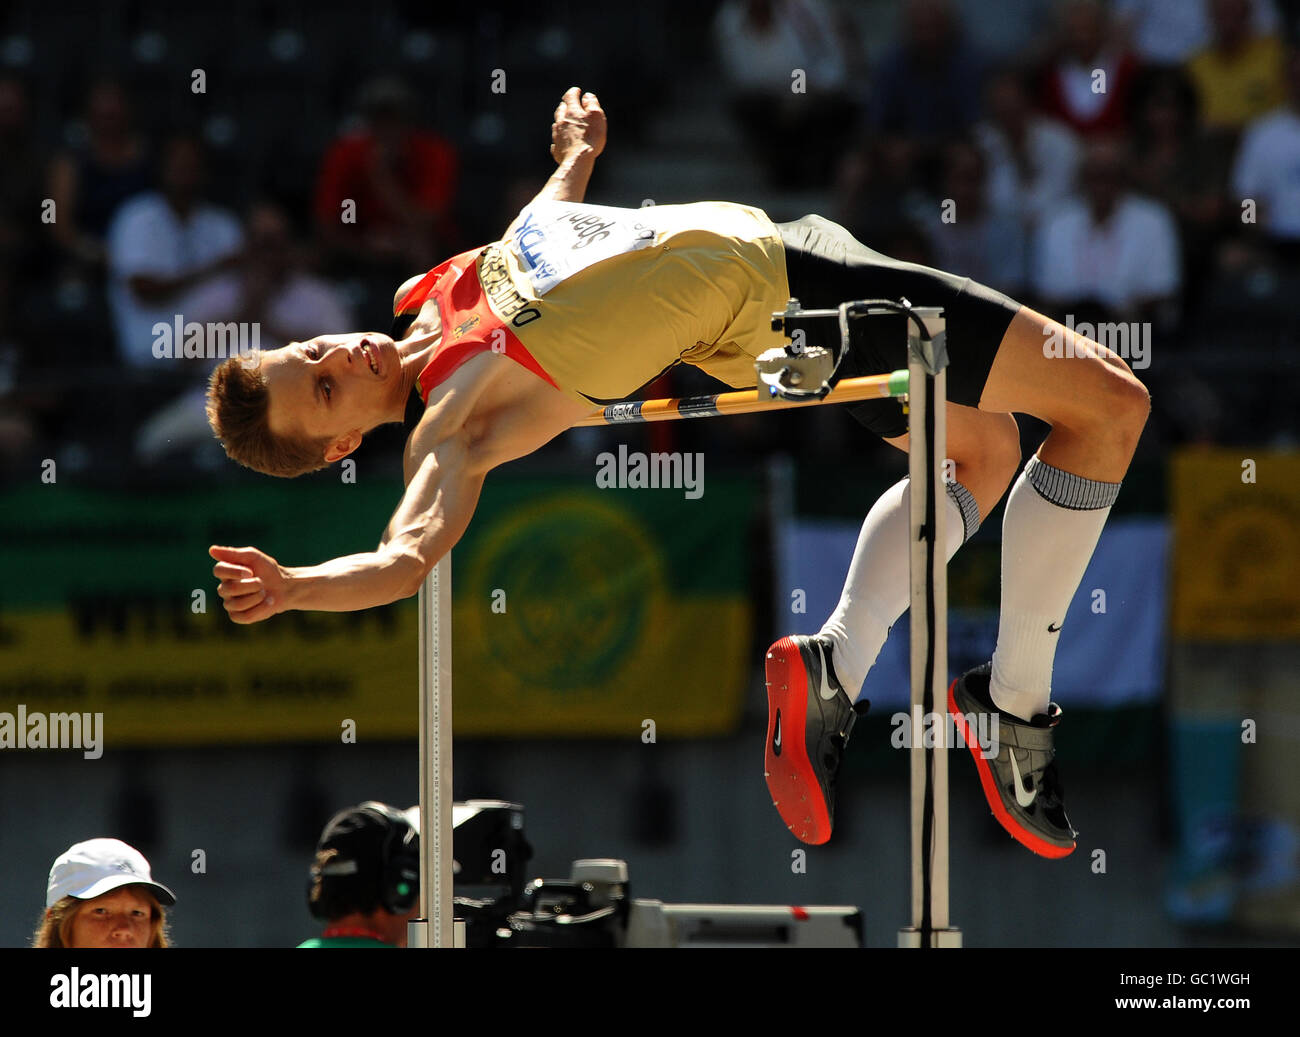 Athletics - IAAF World Athletics Championships - Day Five - Berlin 2009 - Olympiastadion. Germany's Raul Spank in the high jump qualifying Stock Photo